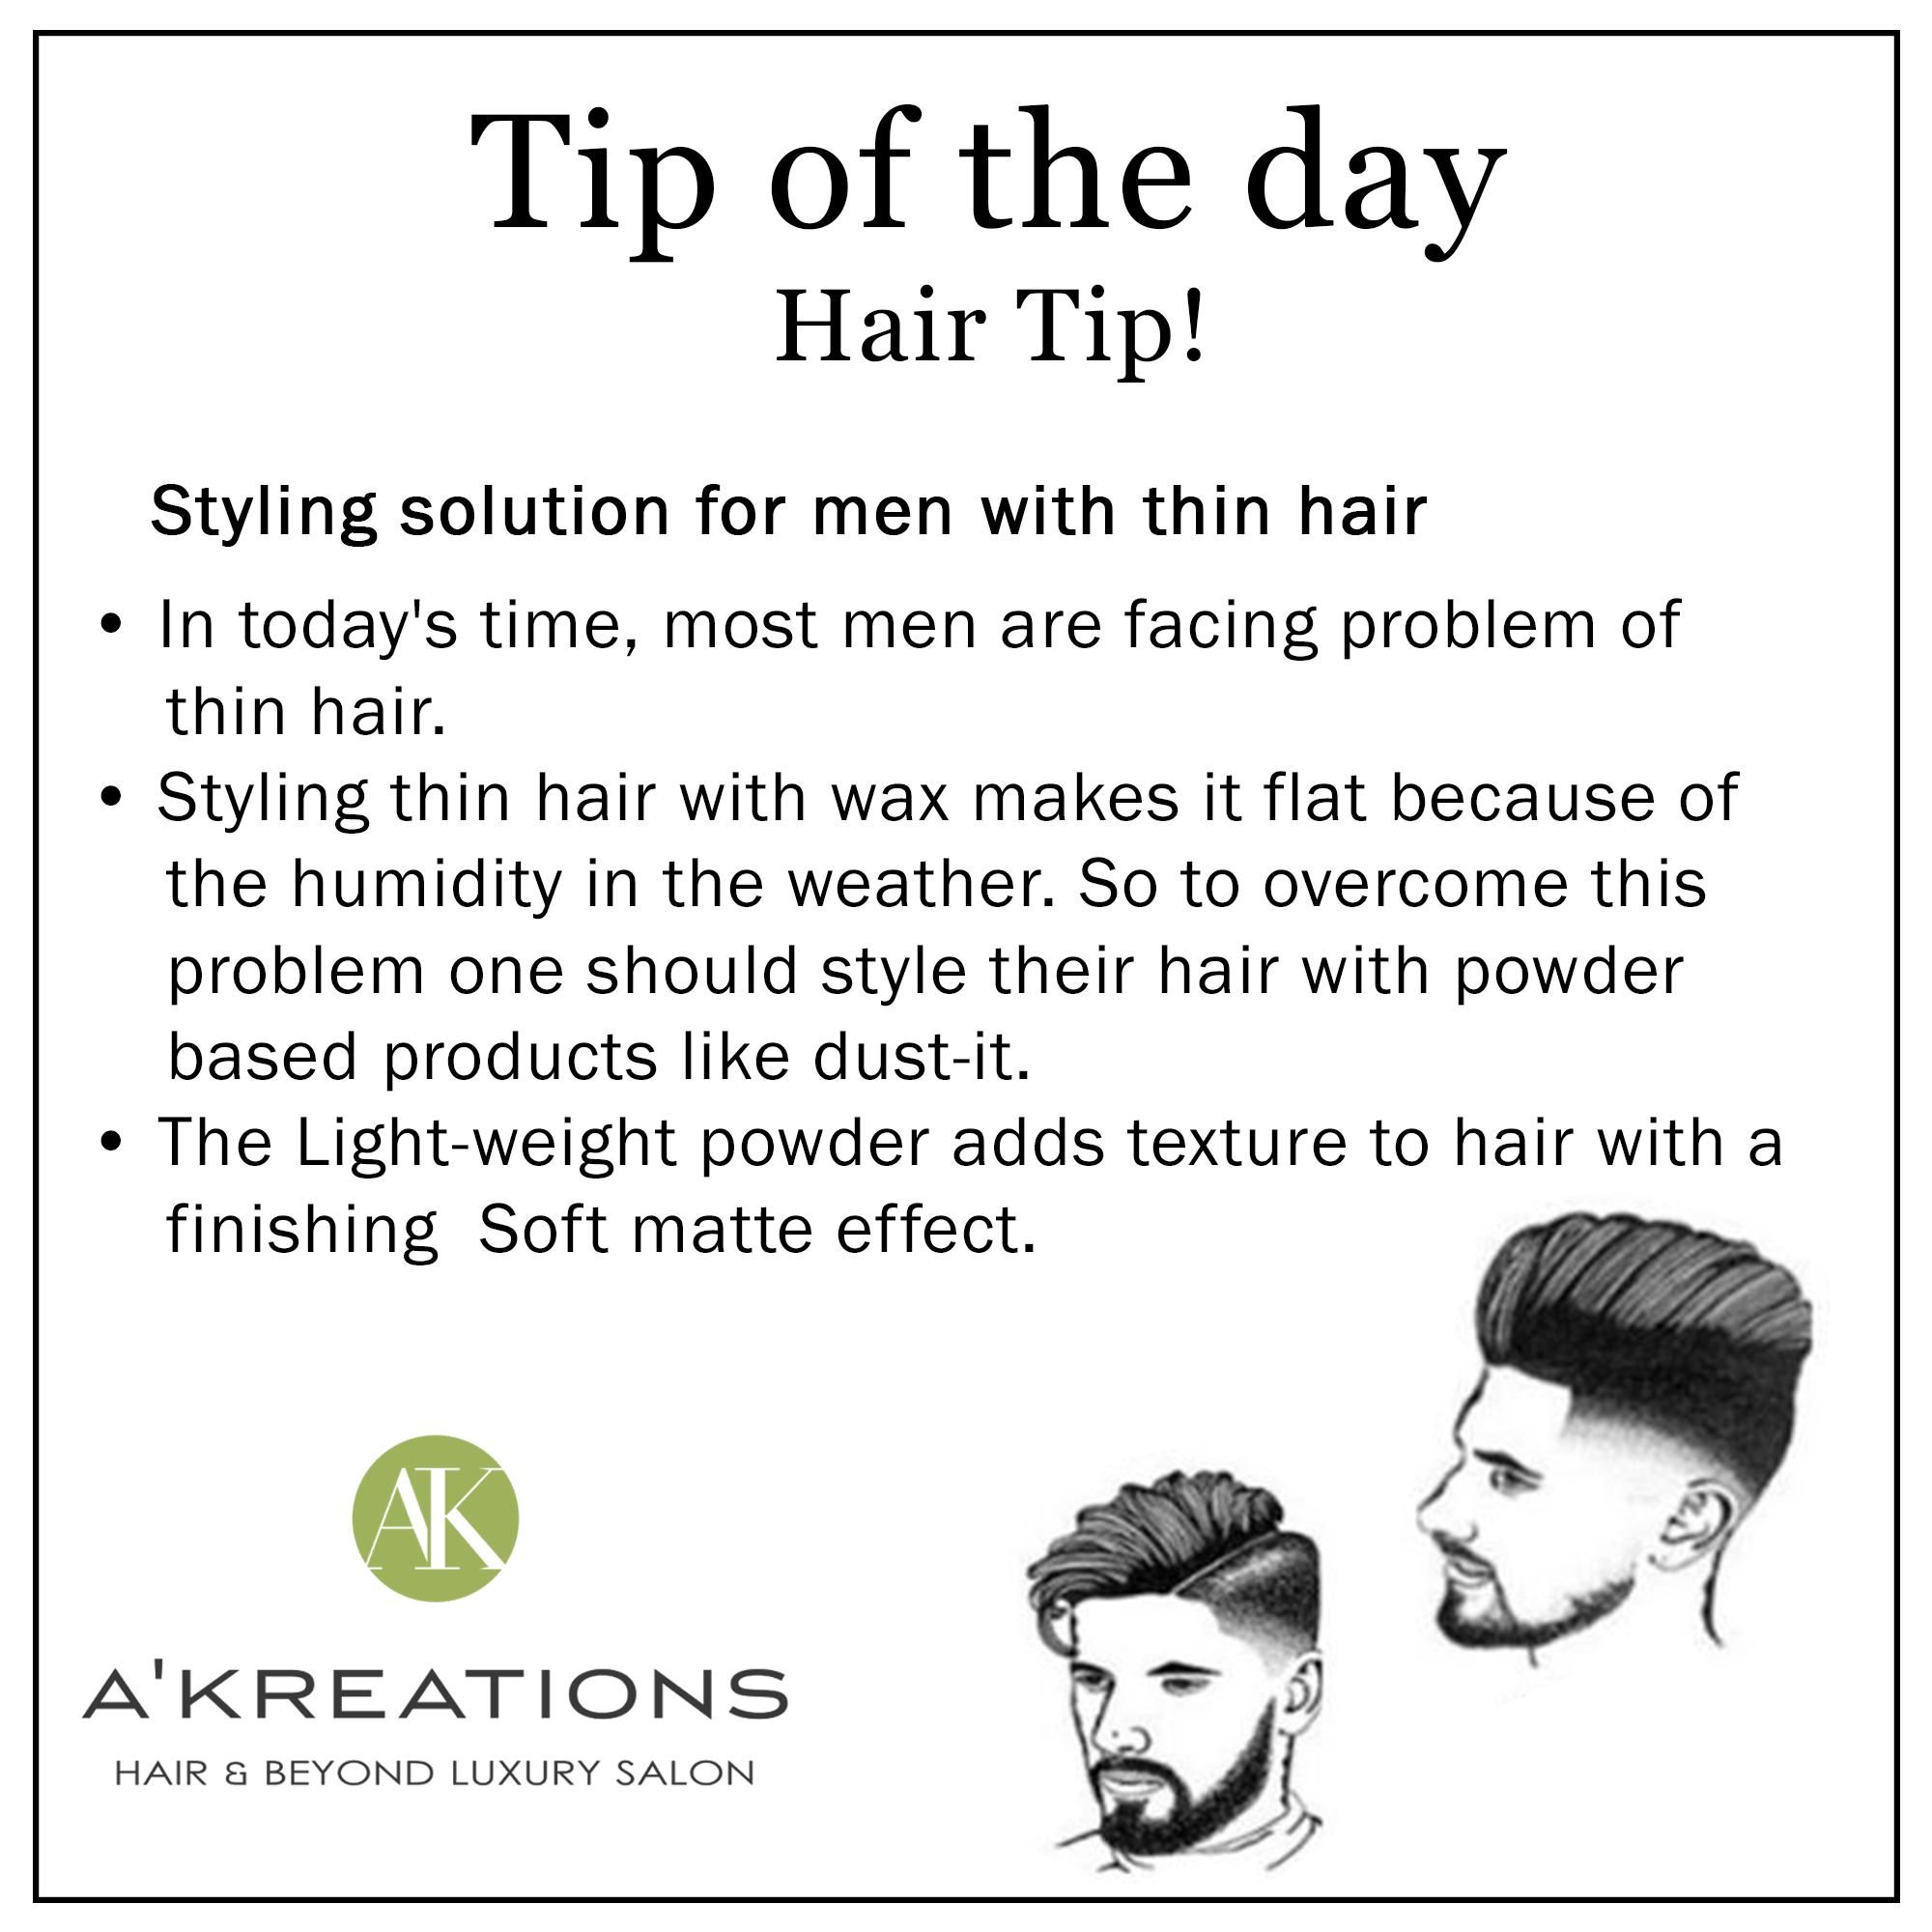 Styling solution for men with thin hair | Blog - A'Kreations Luxury Salon